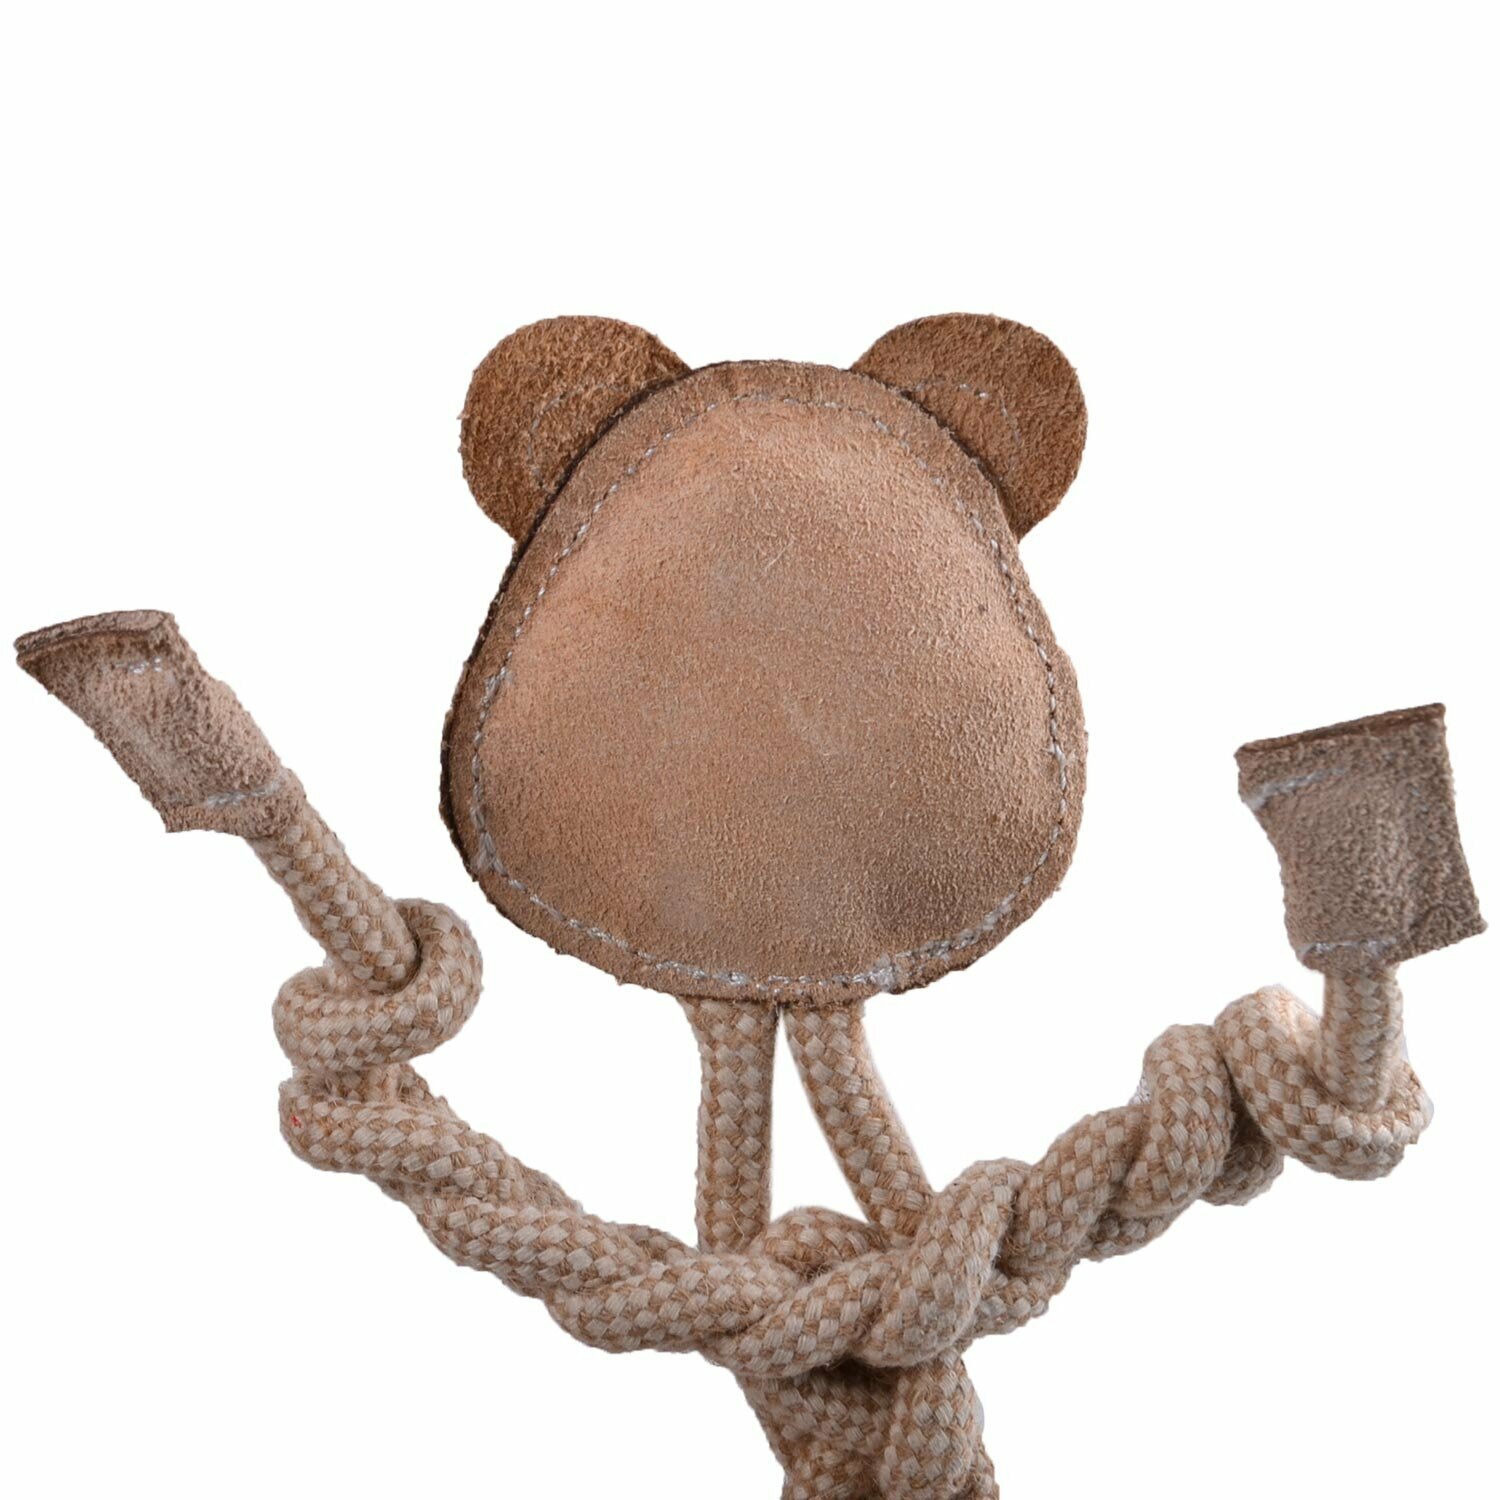 Sweet dog toys from sustainable raw materials